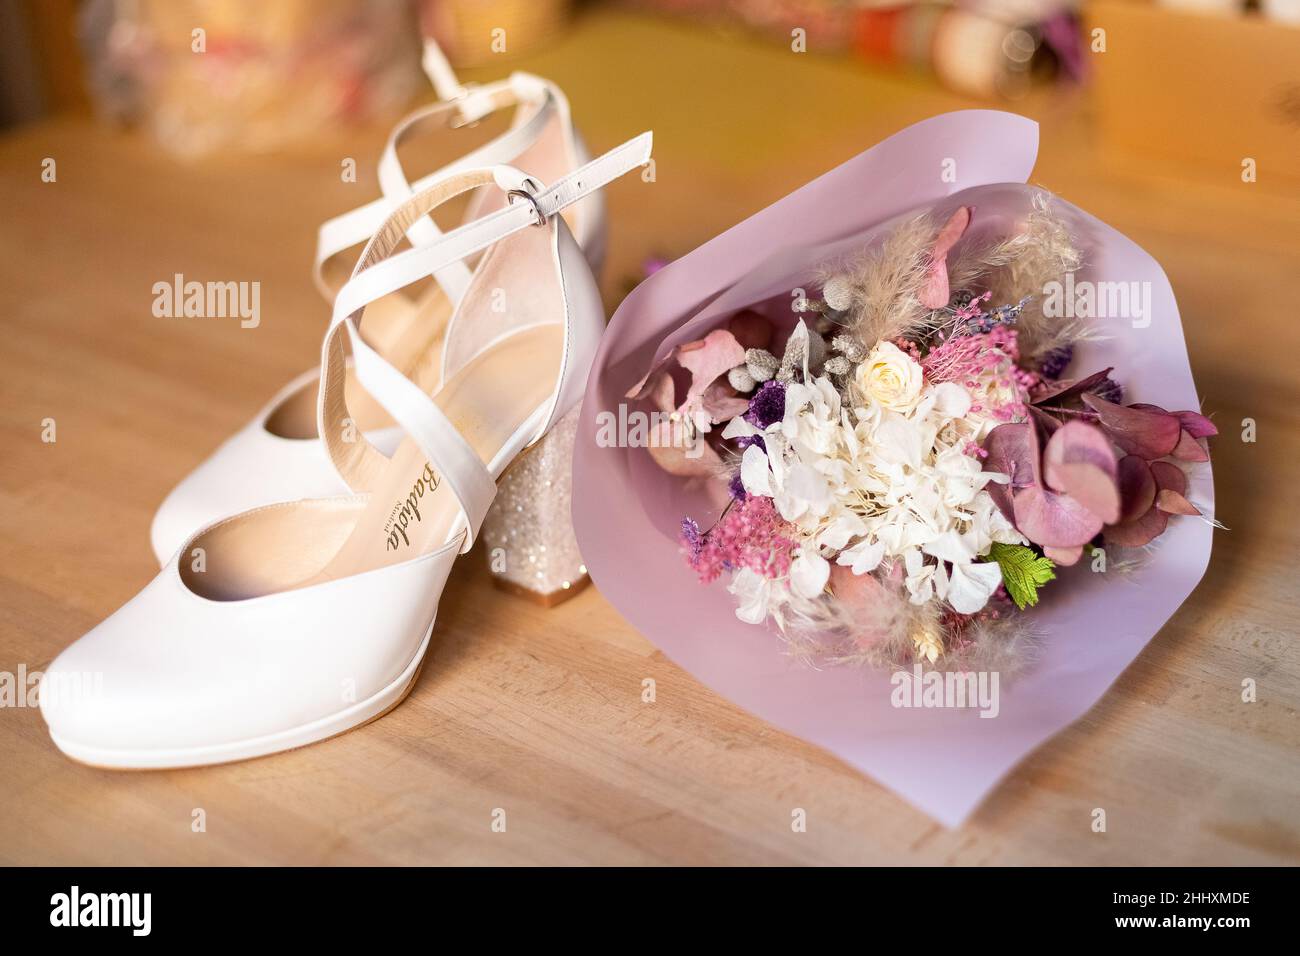 The bridal shoes with a wedding bouquet on the floor Stock Photo